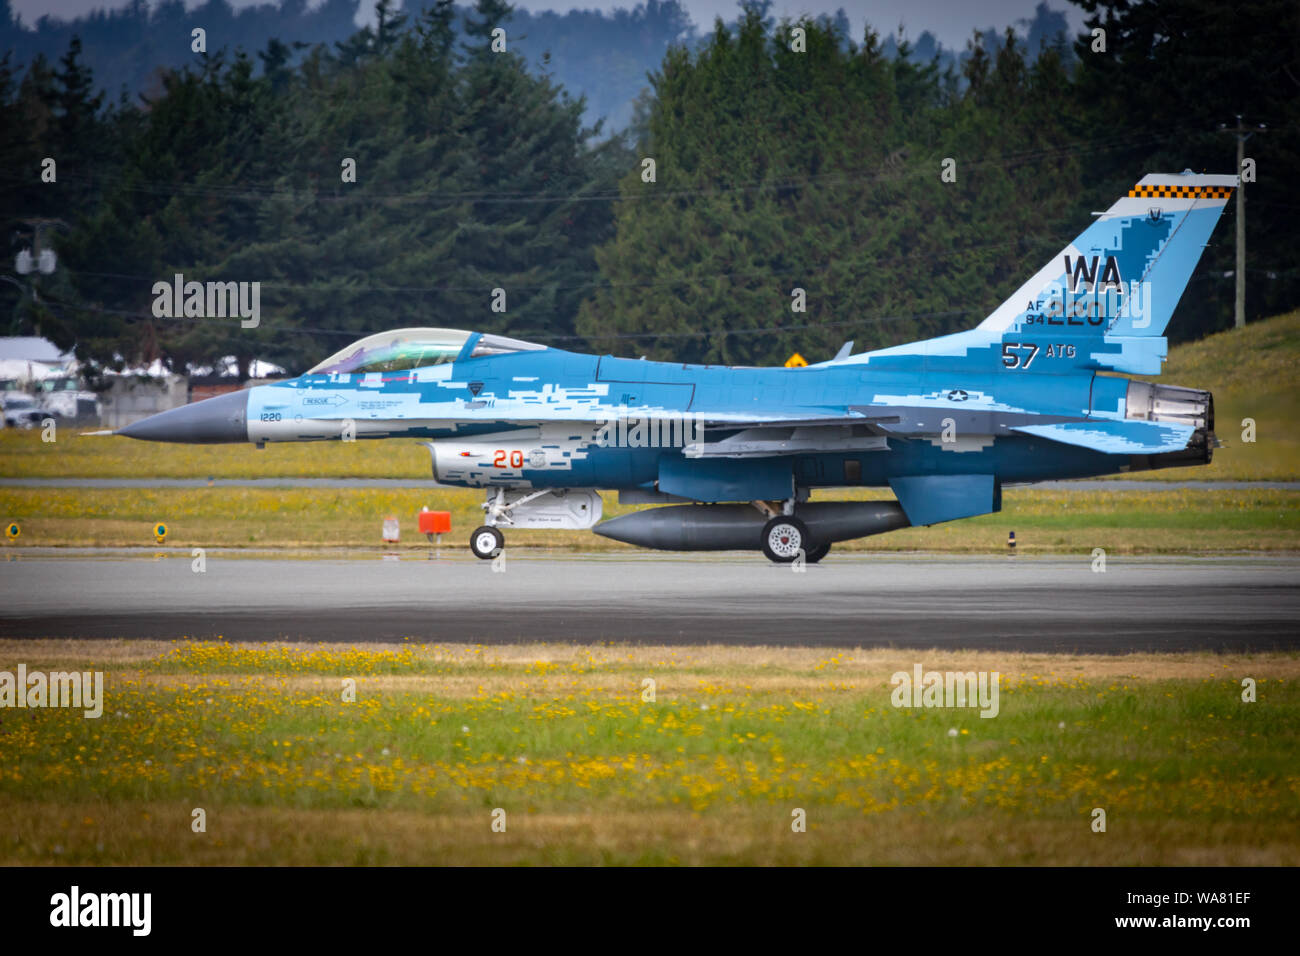 ABBOTSFORD, BC - AUGUST 12 2019 - A F-16 Aggressor taxis runway before departing for home after spending the weekend at Abbotsford Airshow Stock Photo